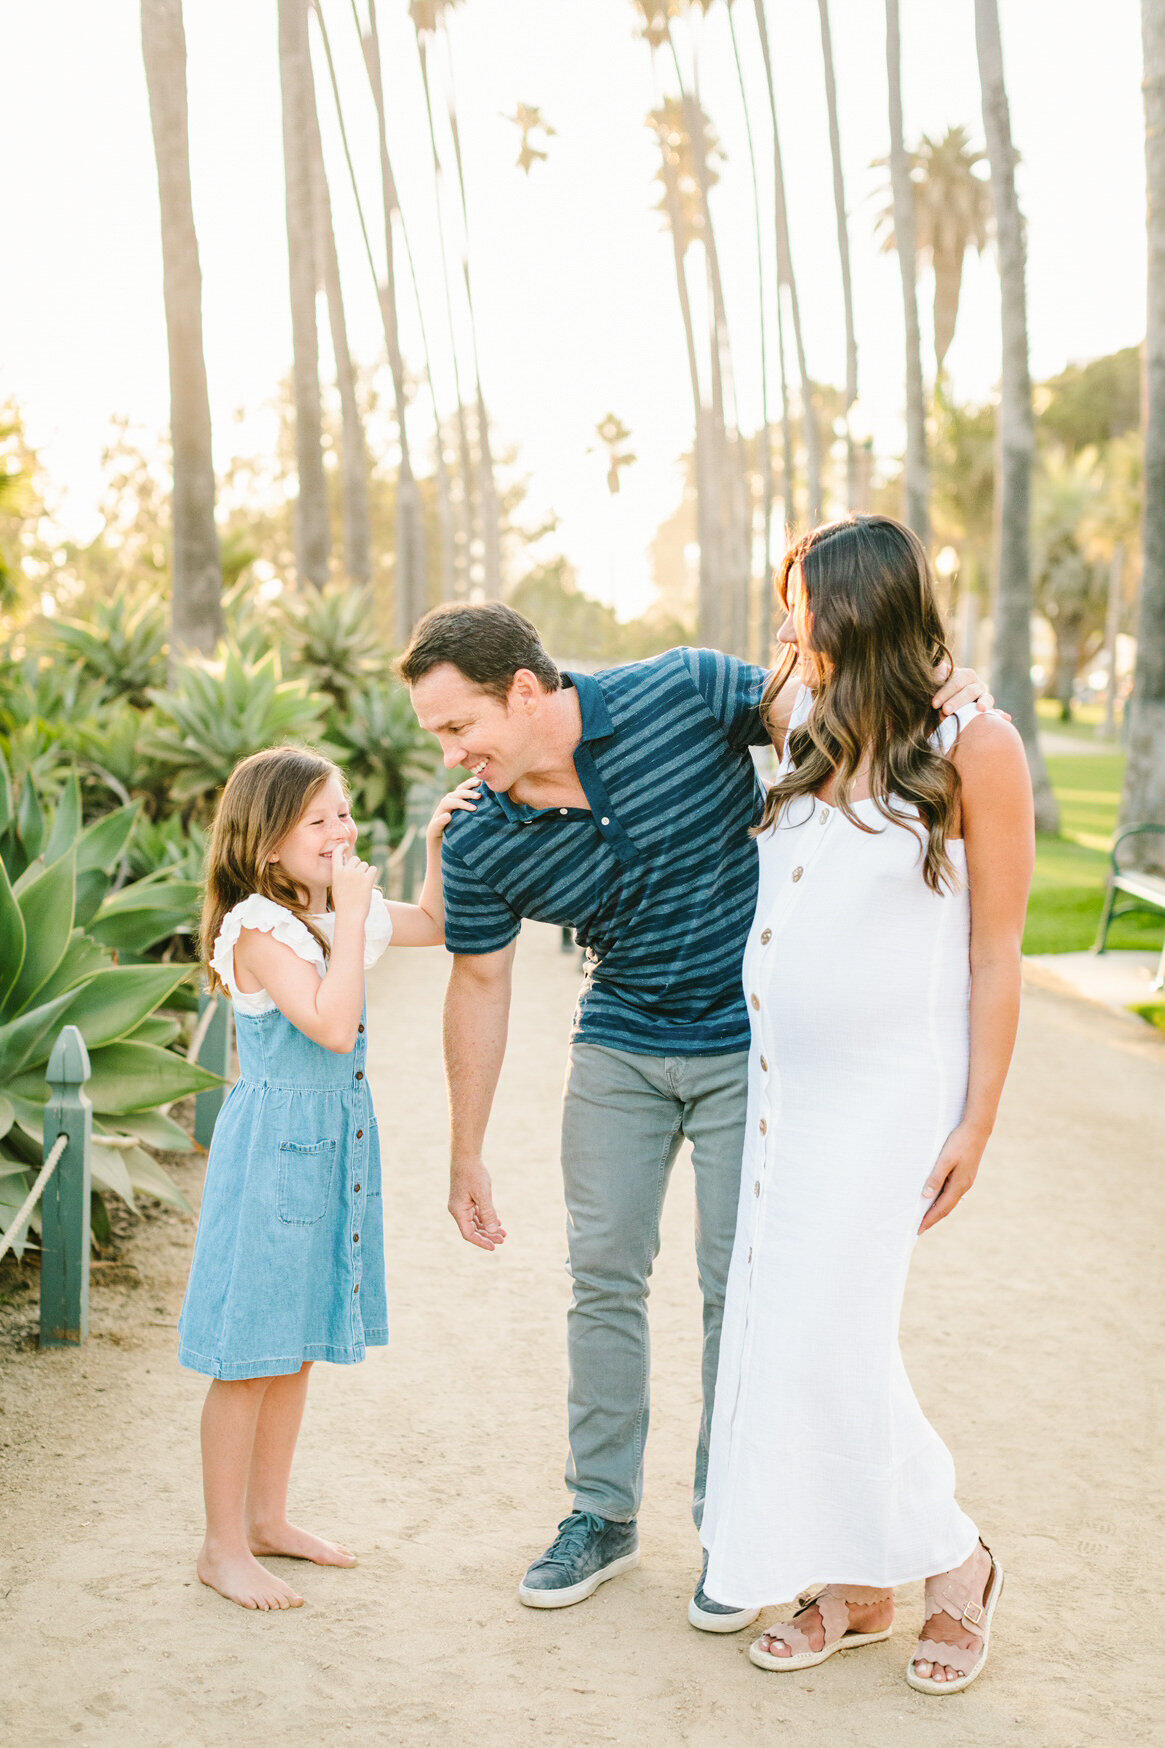 Best California and Texas Family Photographer-Jodee Debes Photography-61